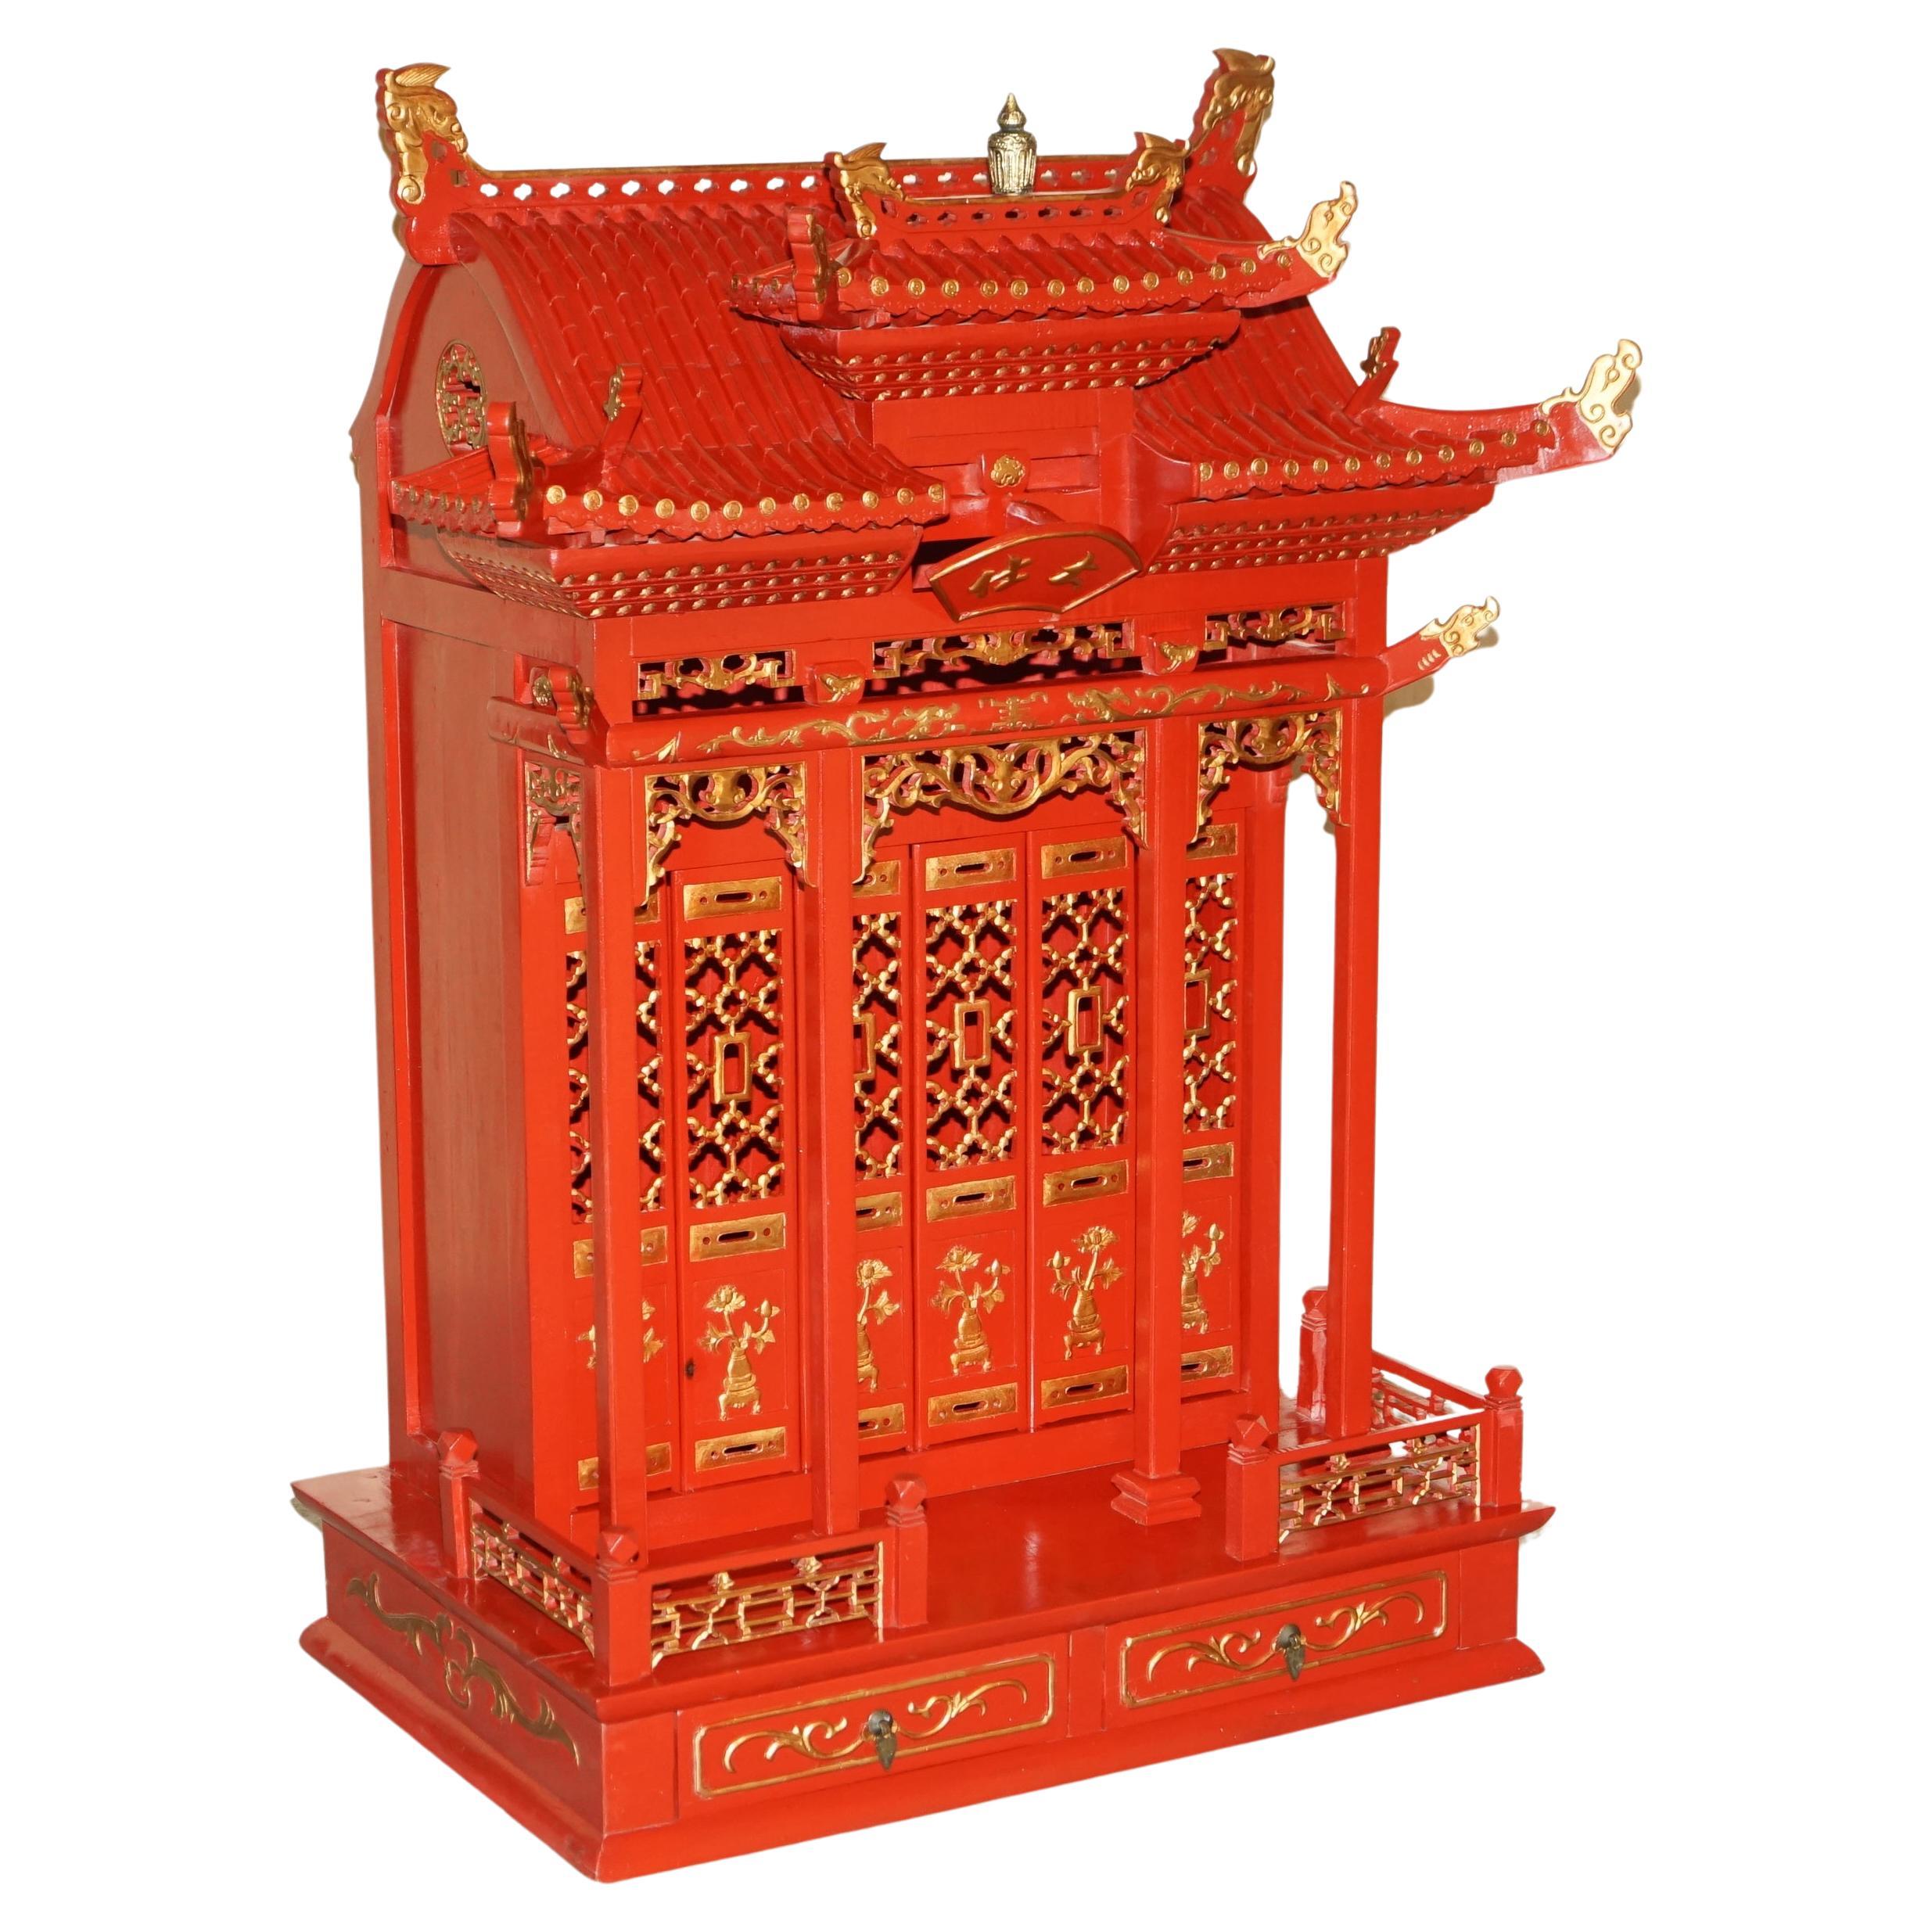 Rare Oriental Chinese Export Vintage Pagoda Top Red Cabinet Very Decorative